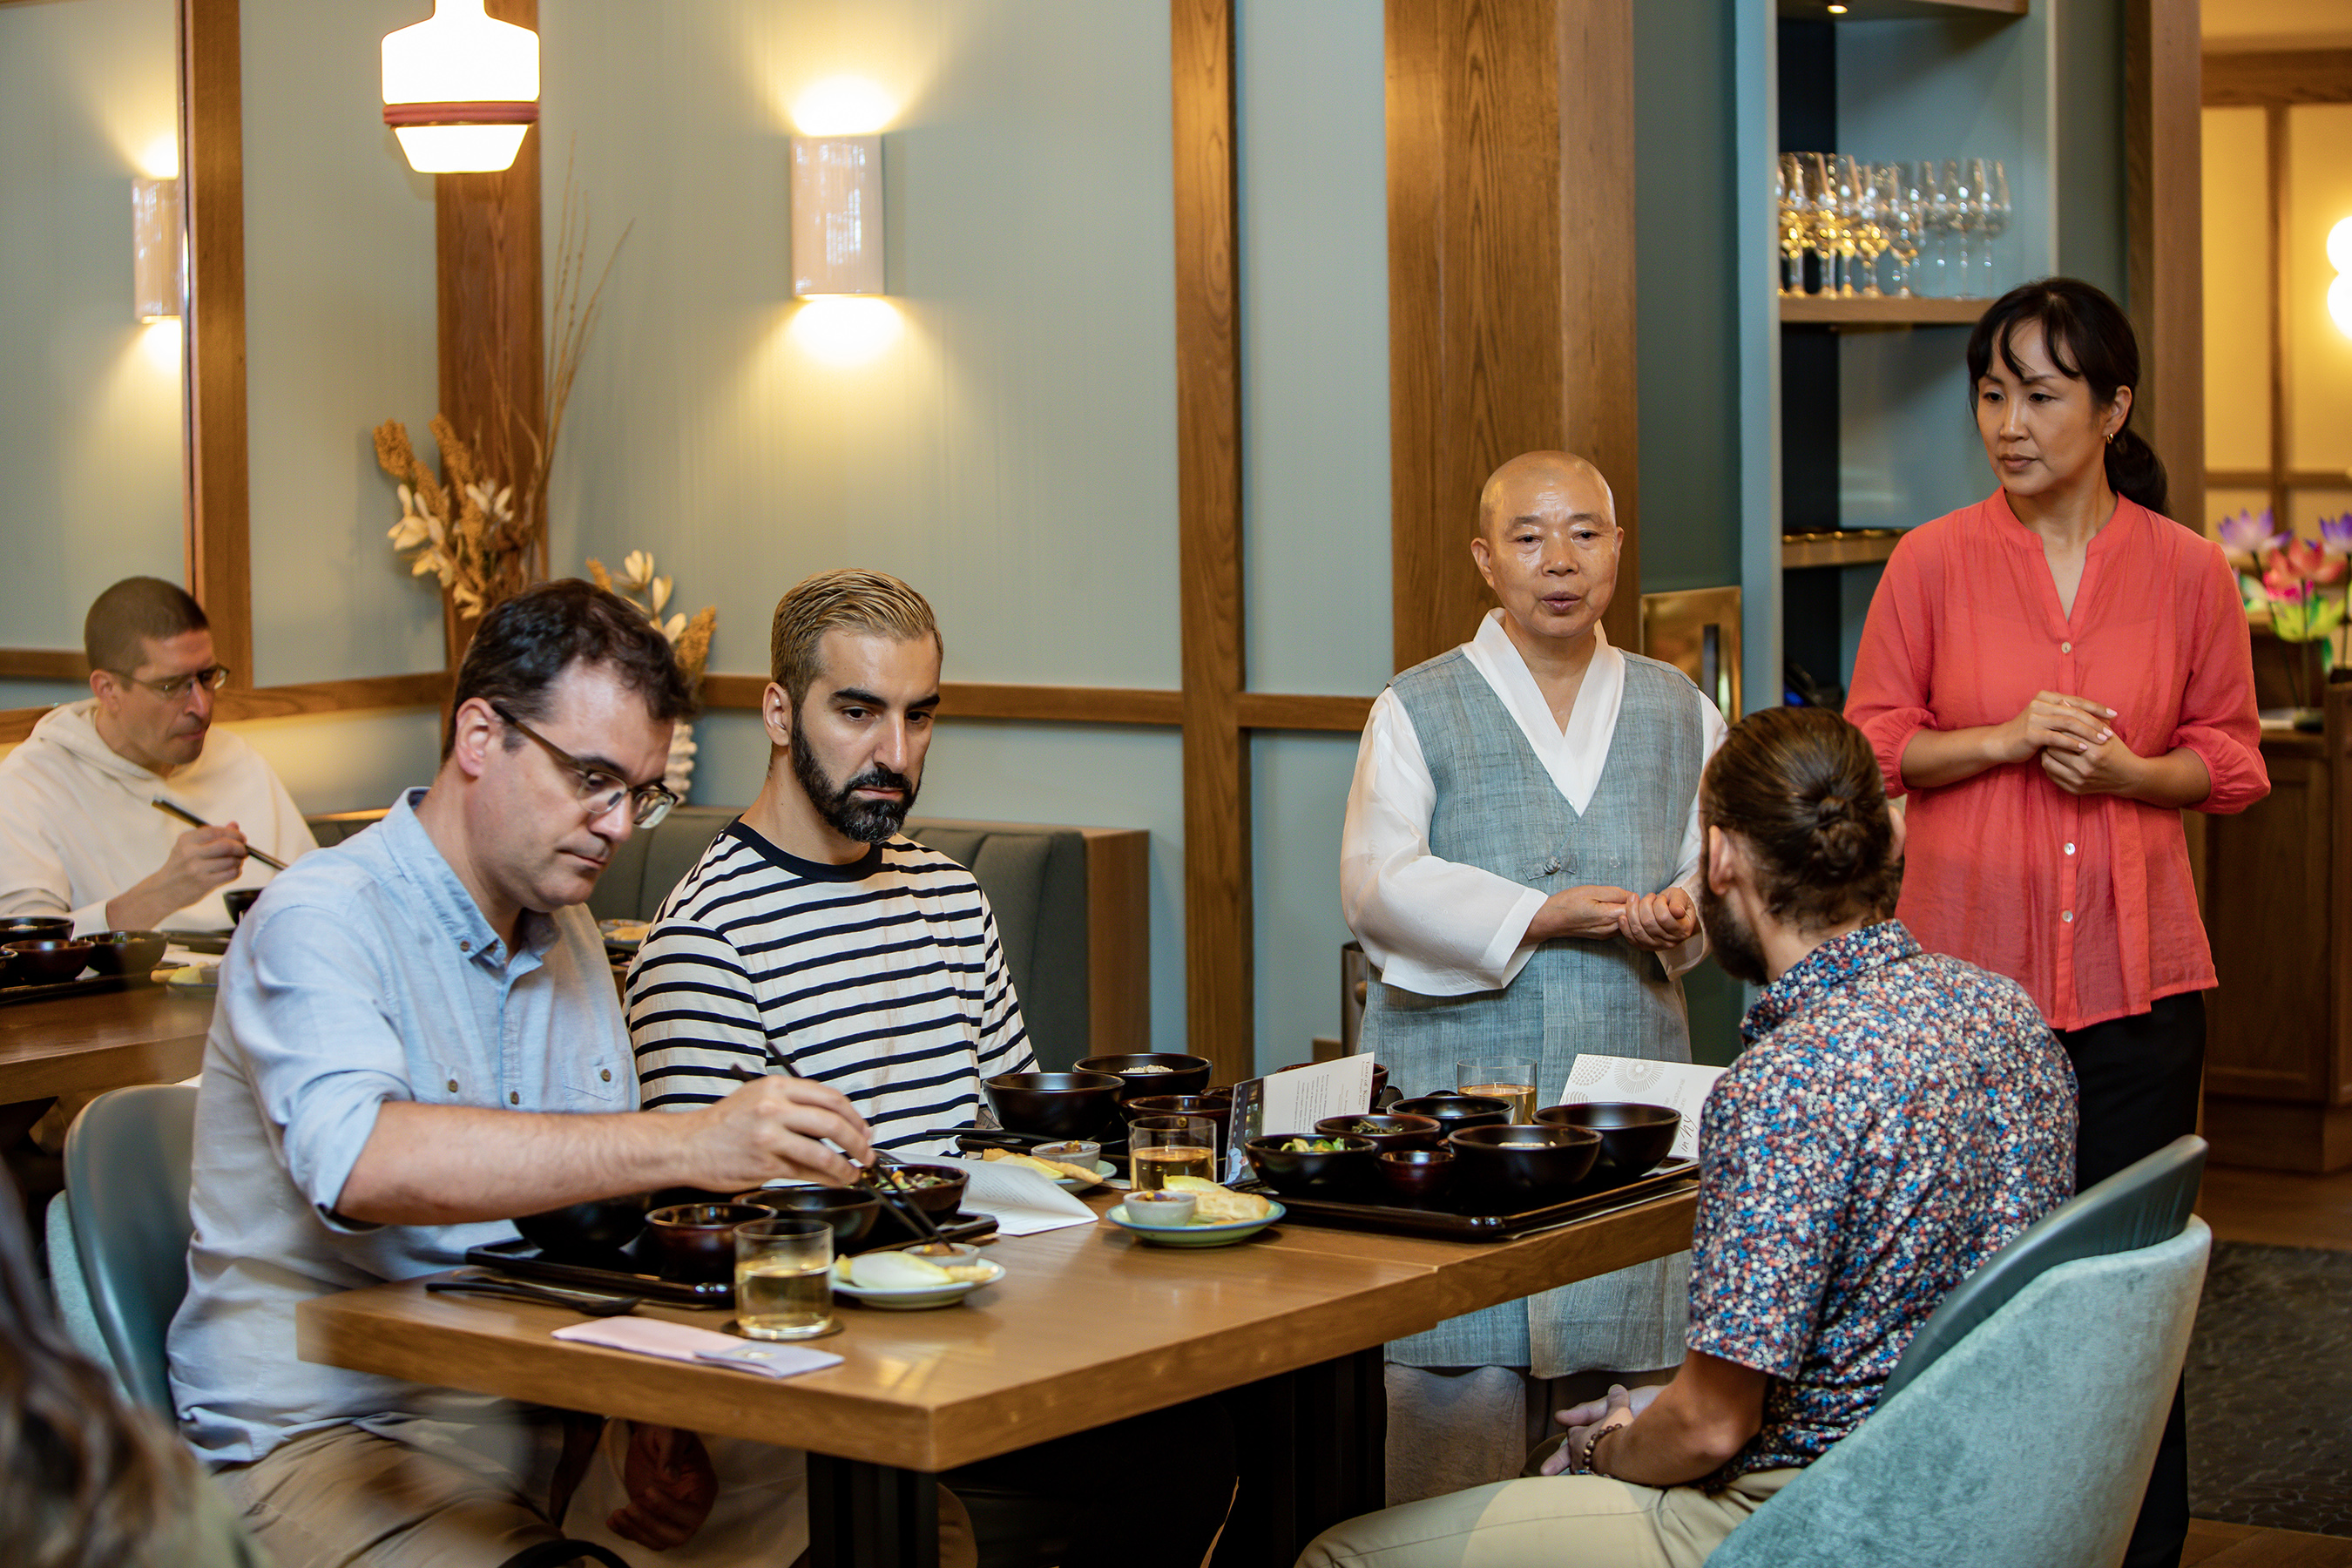 New Yorkers experience Balwoo Gongyang, a pop-up restaurant located in the middle of Manhattan